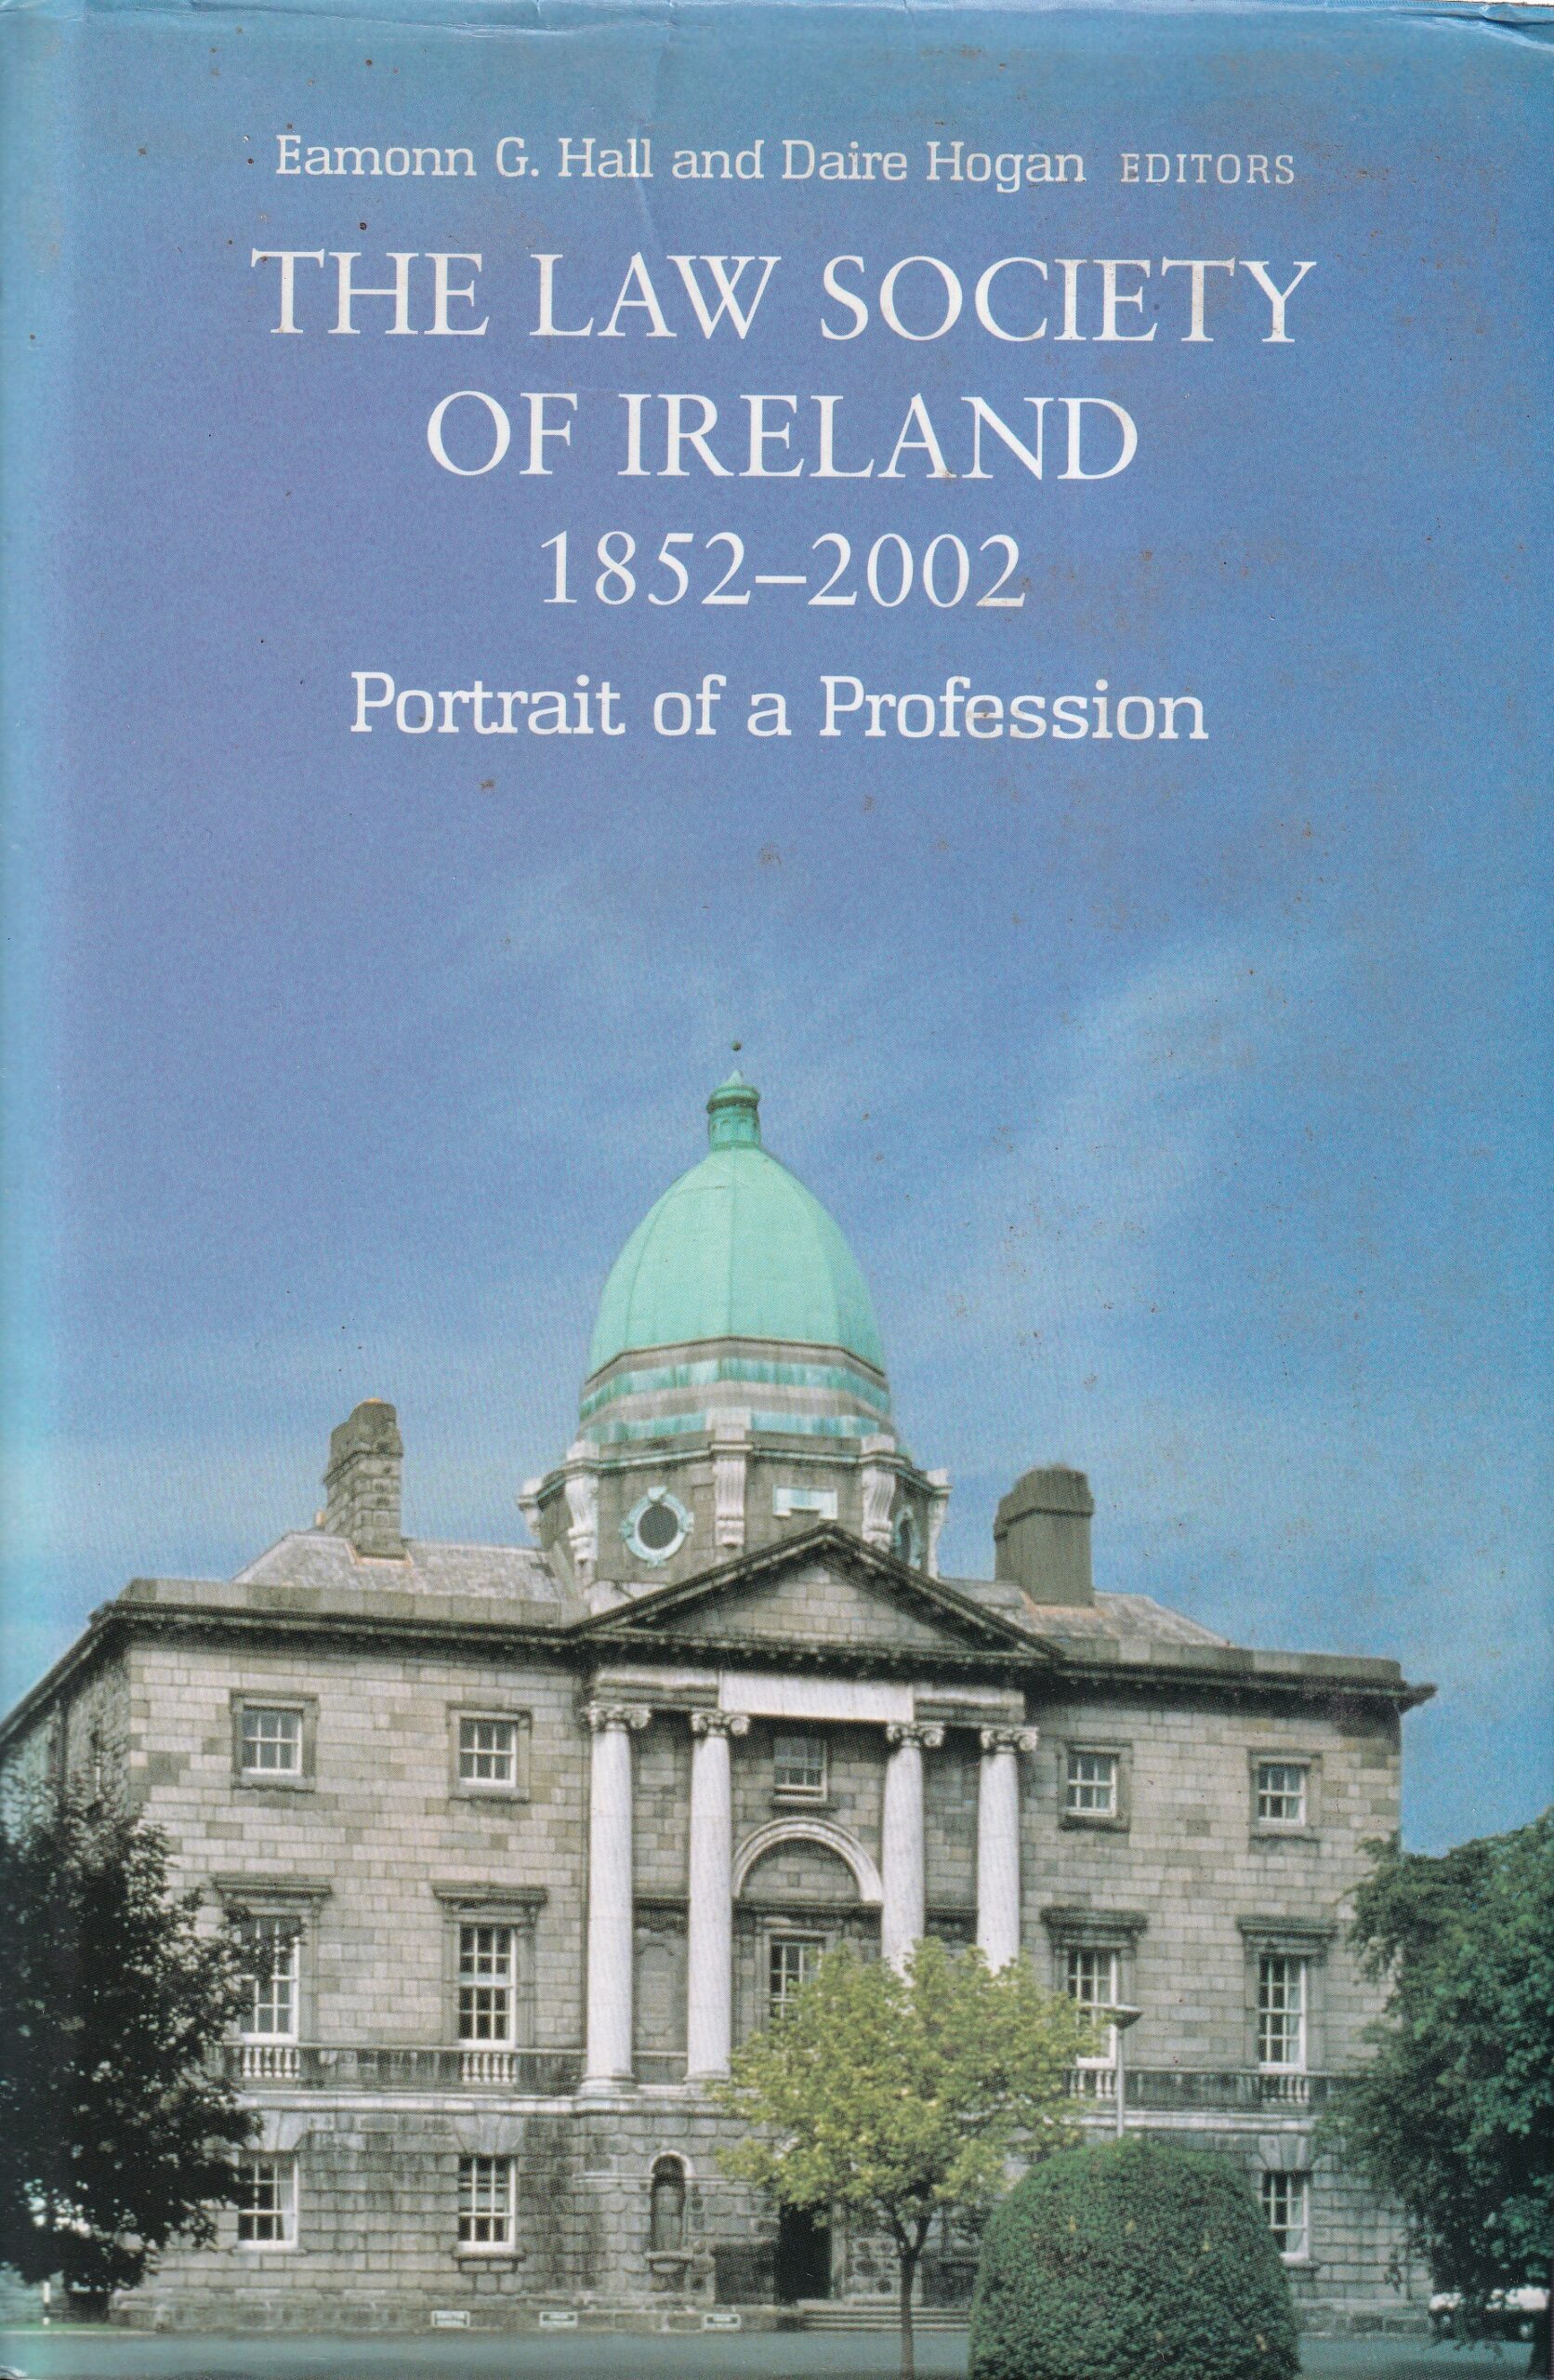 The Law Society of Ireland, 1852-2002: Portrait of a Profession | Eamonn G. Hall and Daire Hogan (eds.) | Charlie Byrne's